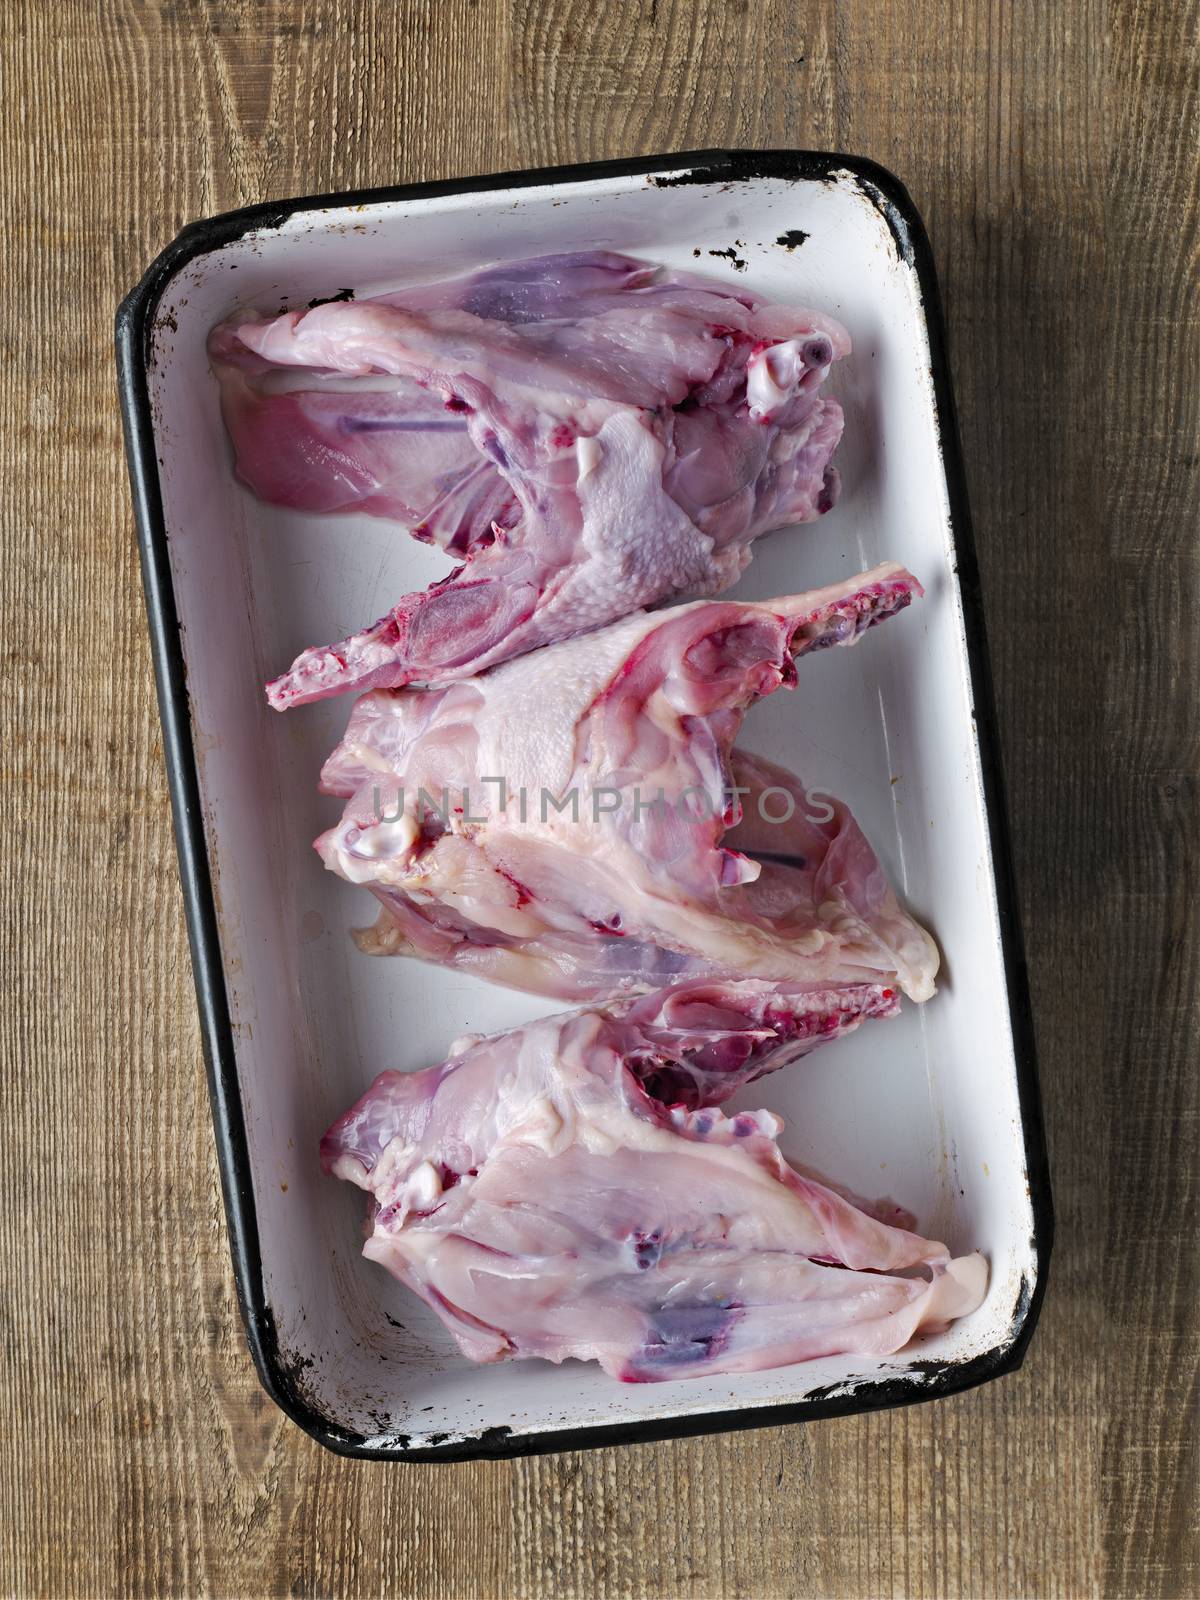 rustic chicken bone carcass soup ingredient by zkruger